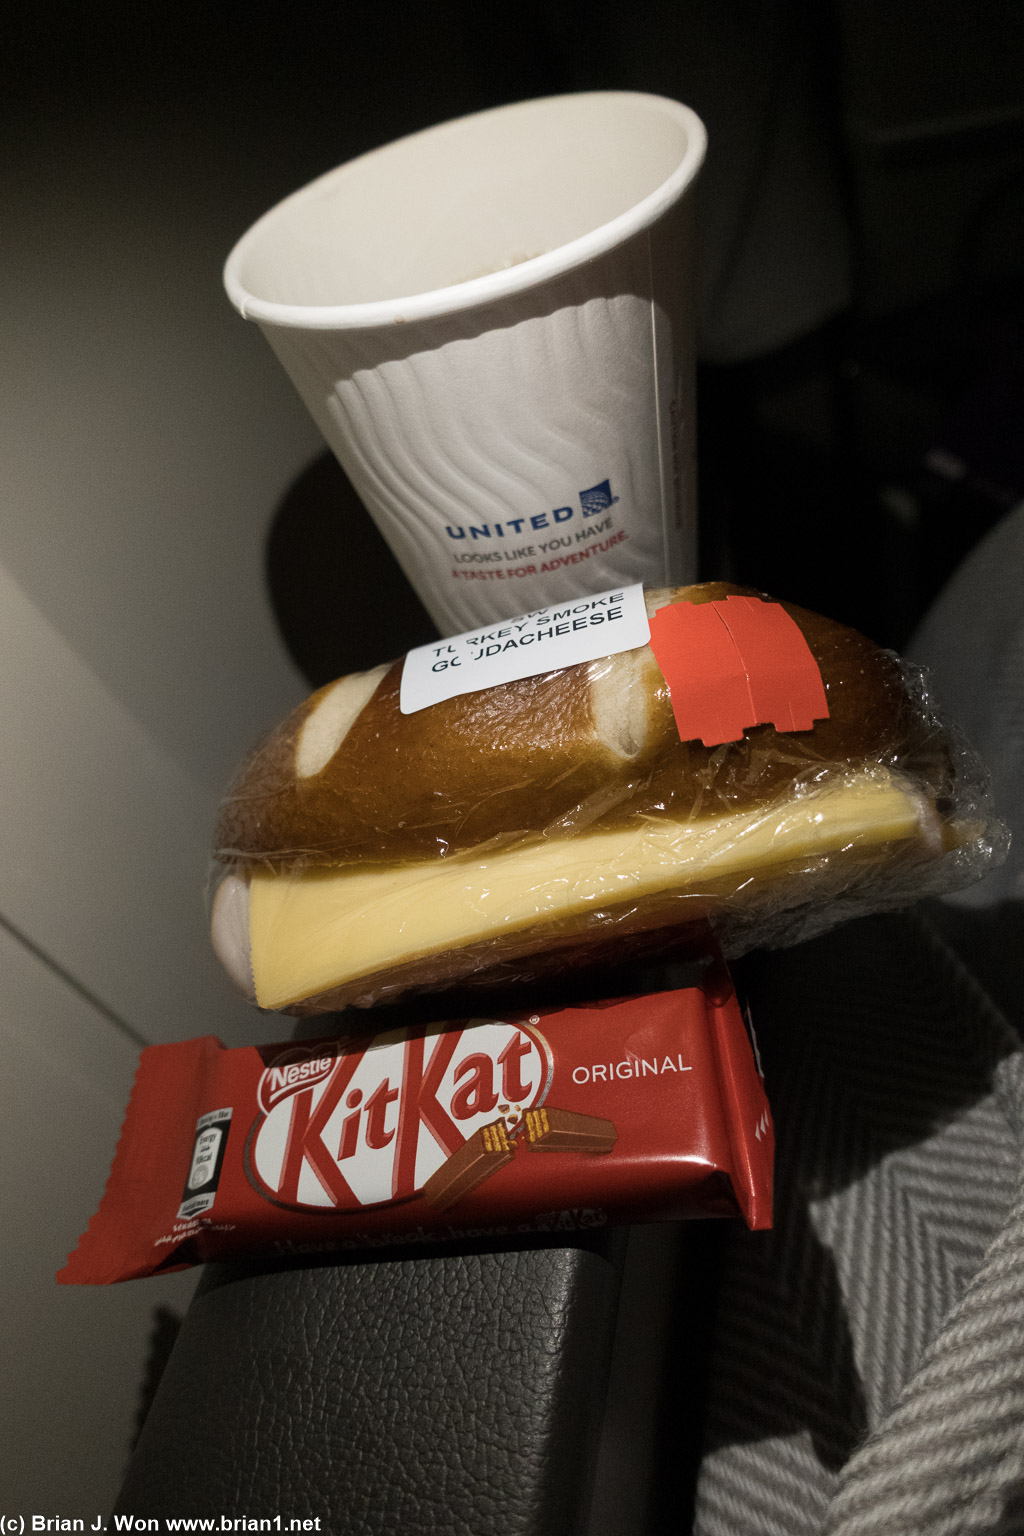 Mid-flight snack is slightly more appetizing than yesterday's.